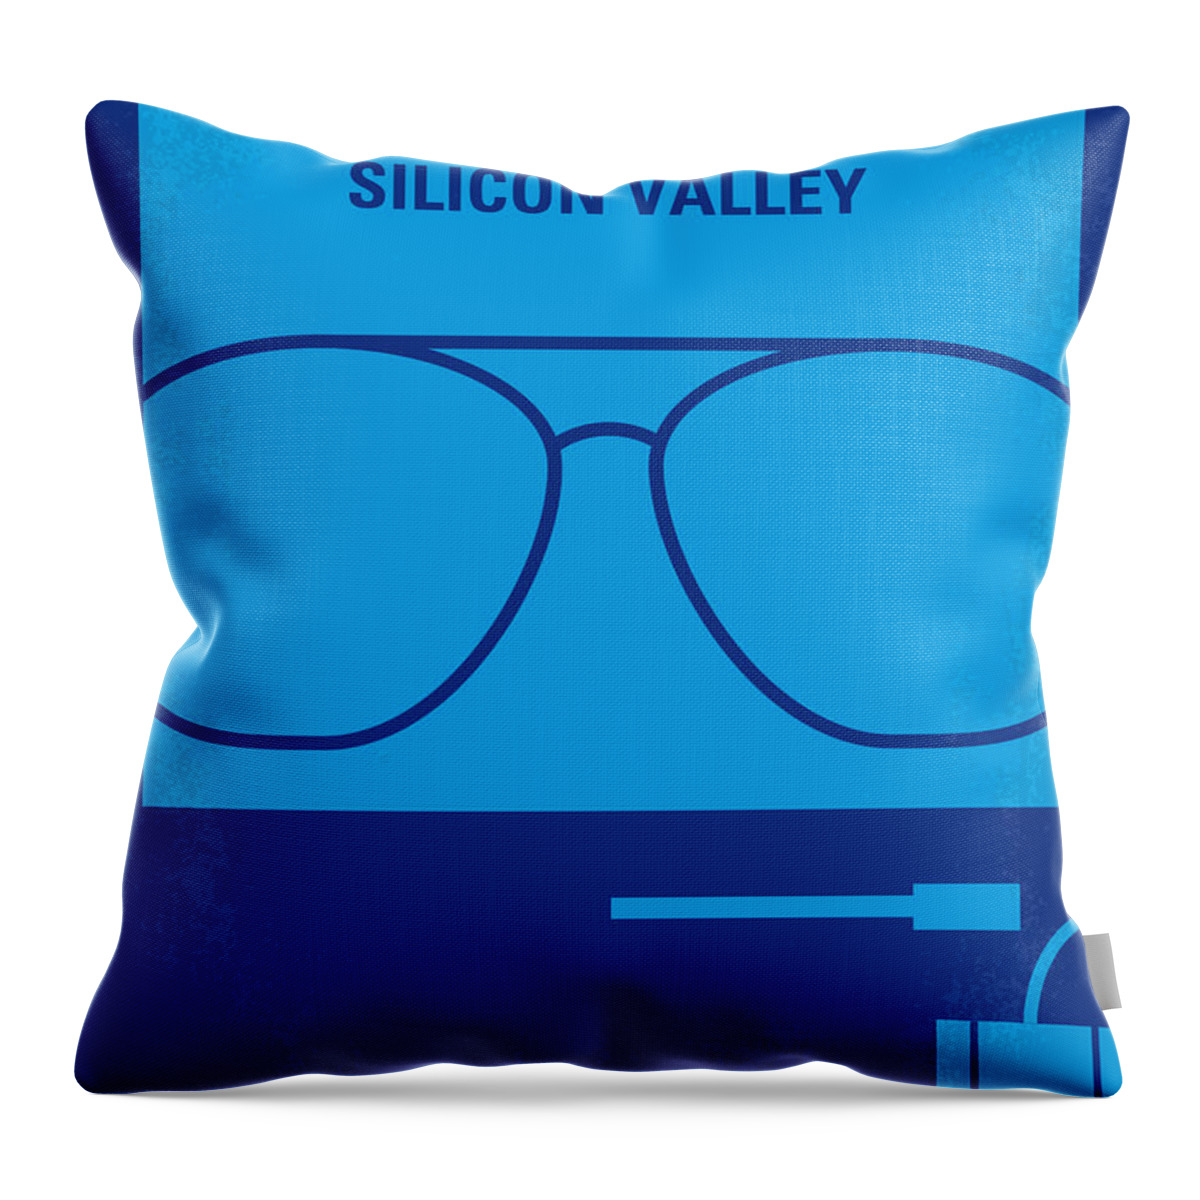 Pirates Of Silicon Valley Throw Pillow featuring the digital art No064 My Pirates of Silicon Valley minimal movie poster by Chungkong Art